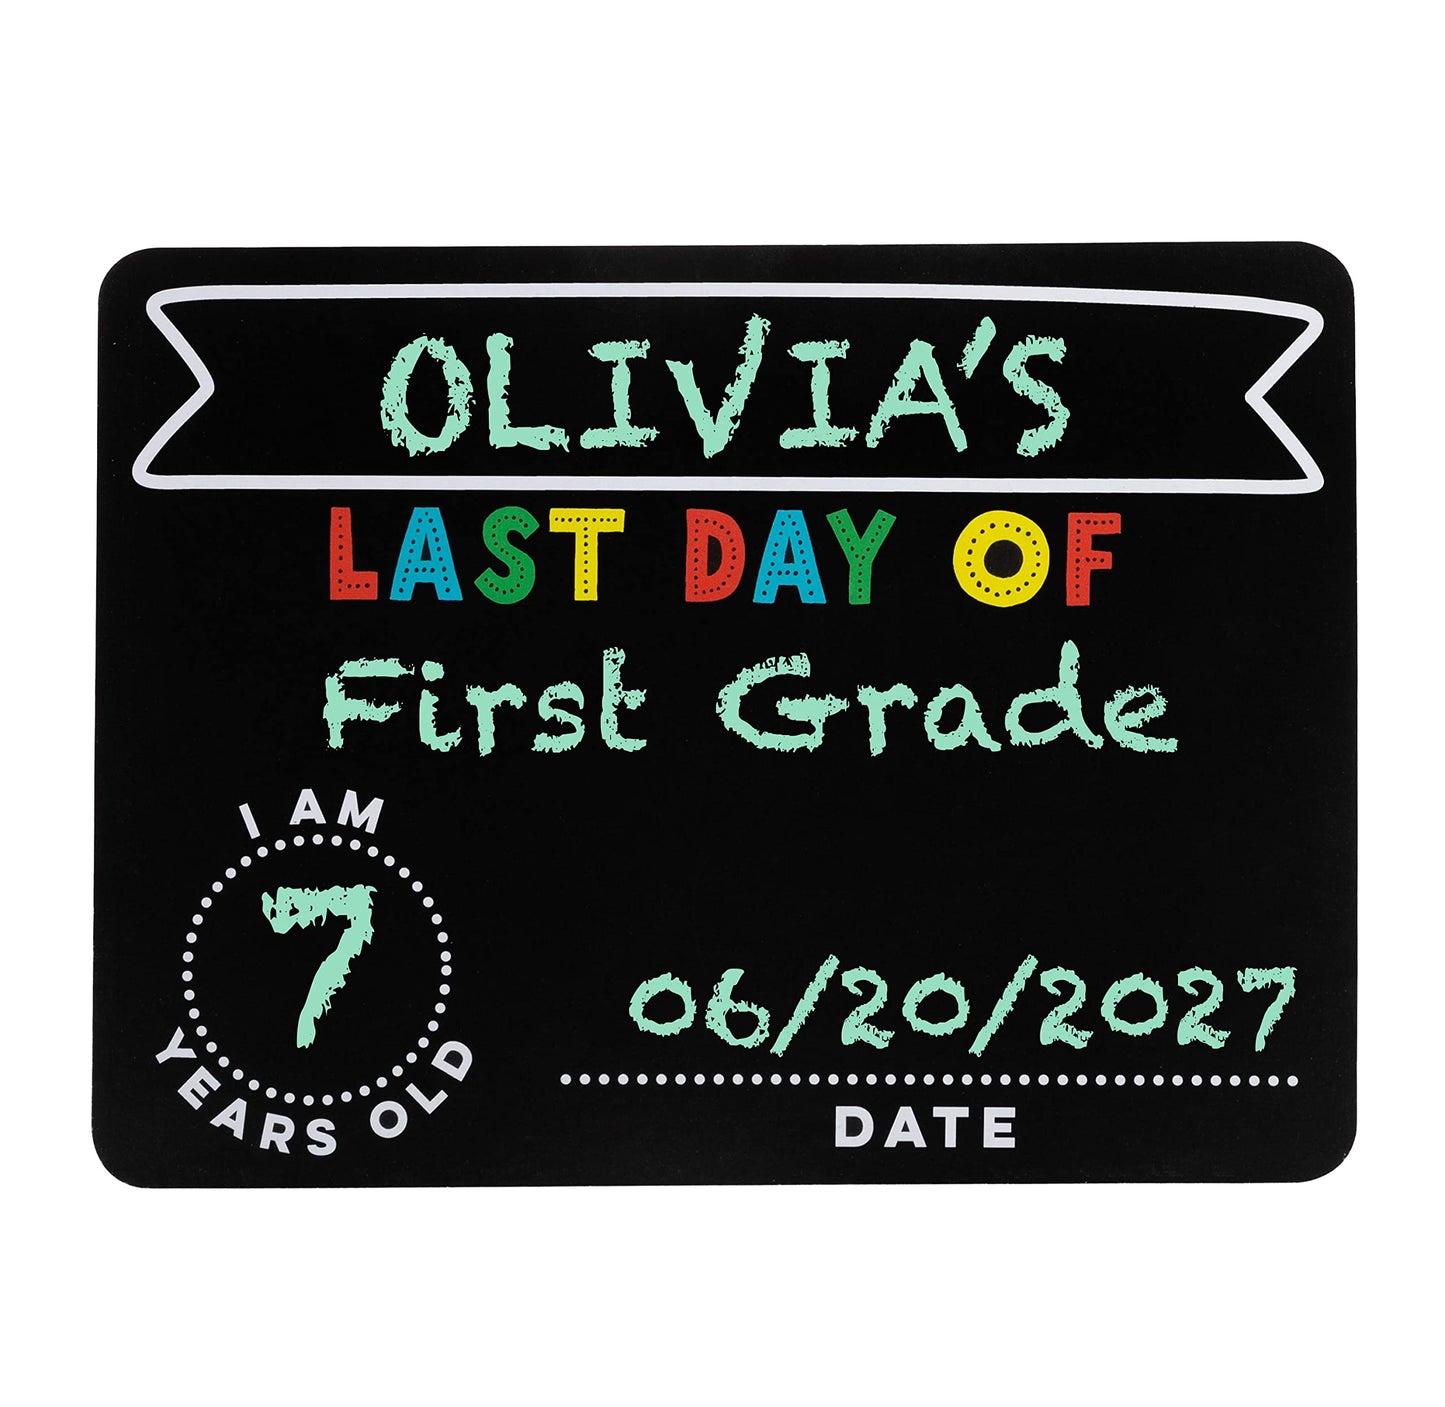 Kate & Milo Apple Handprint Canvas Frame, First Day of School Photo Sharing Prop